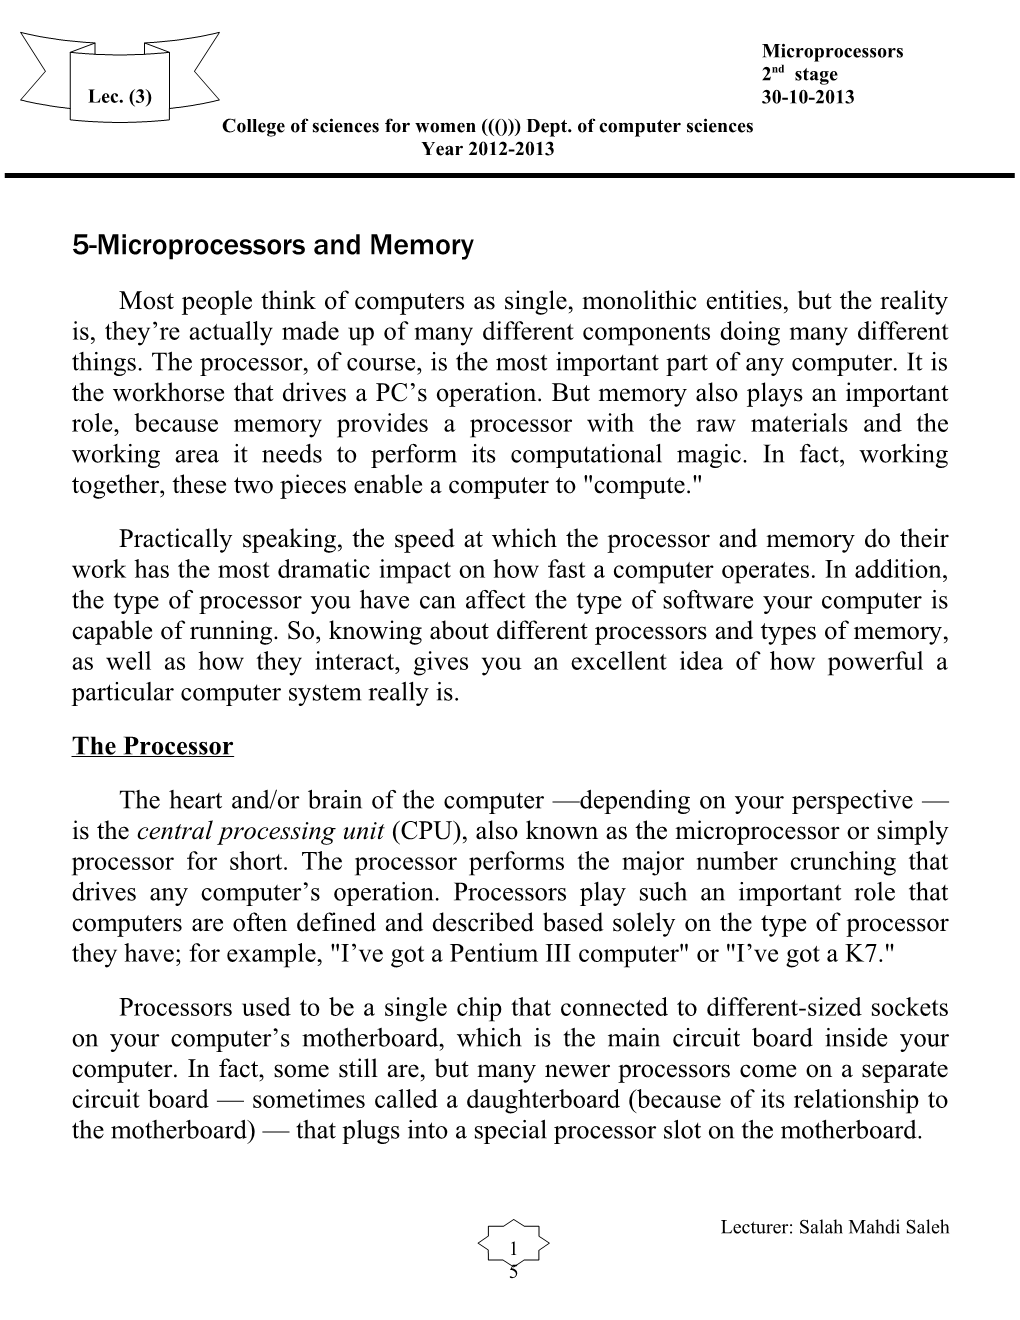 5-Microprocessors and Memory